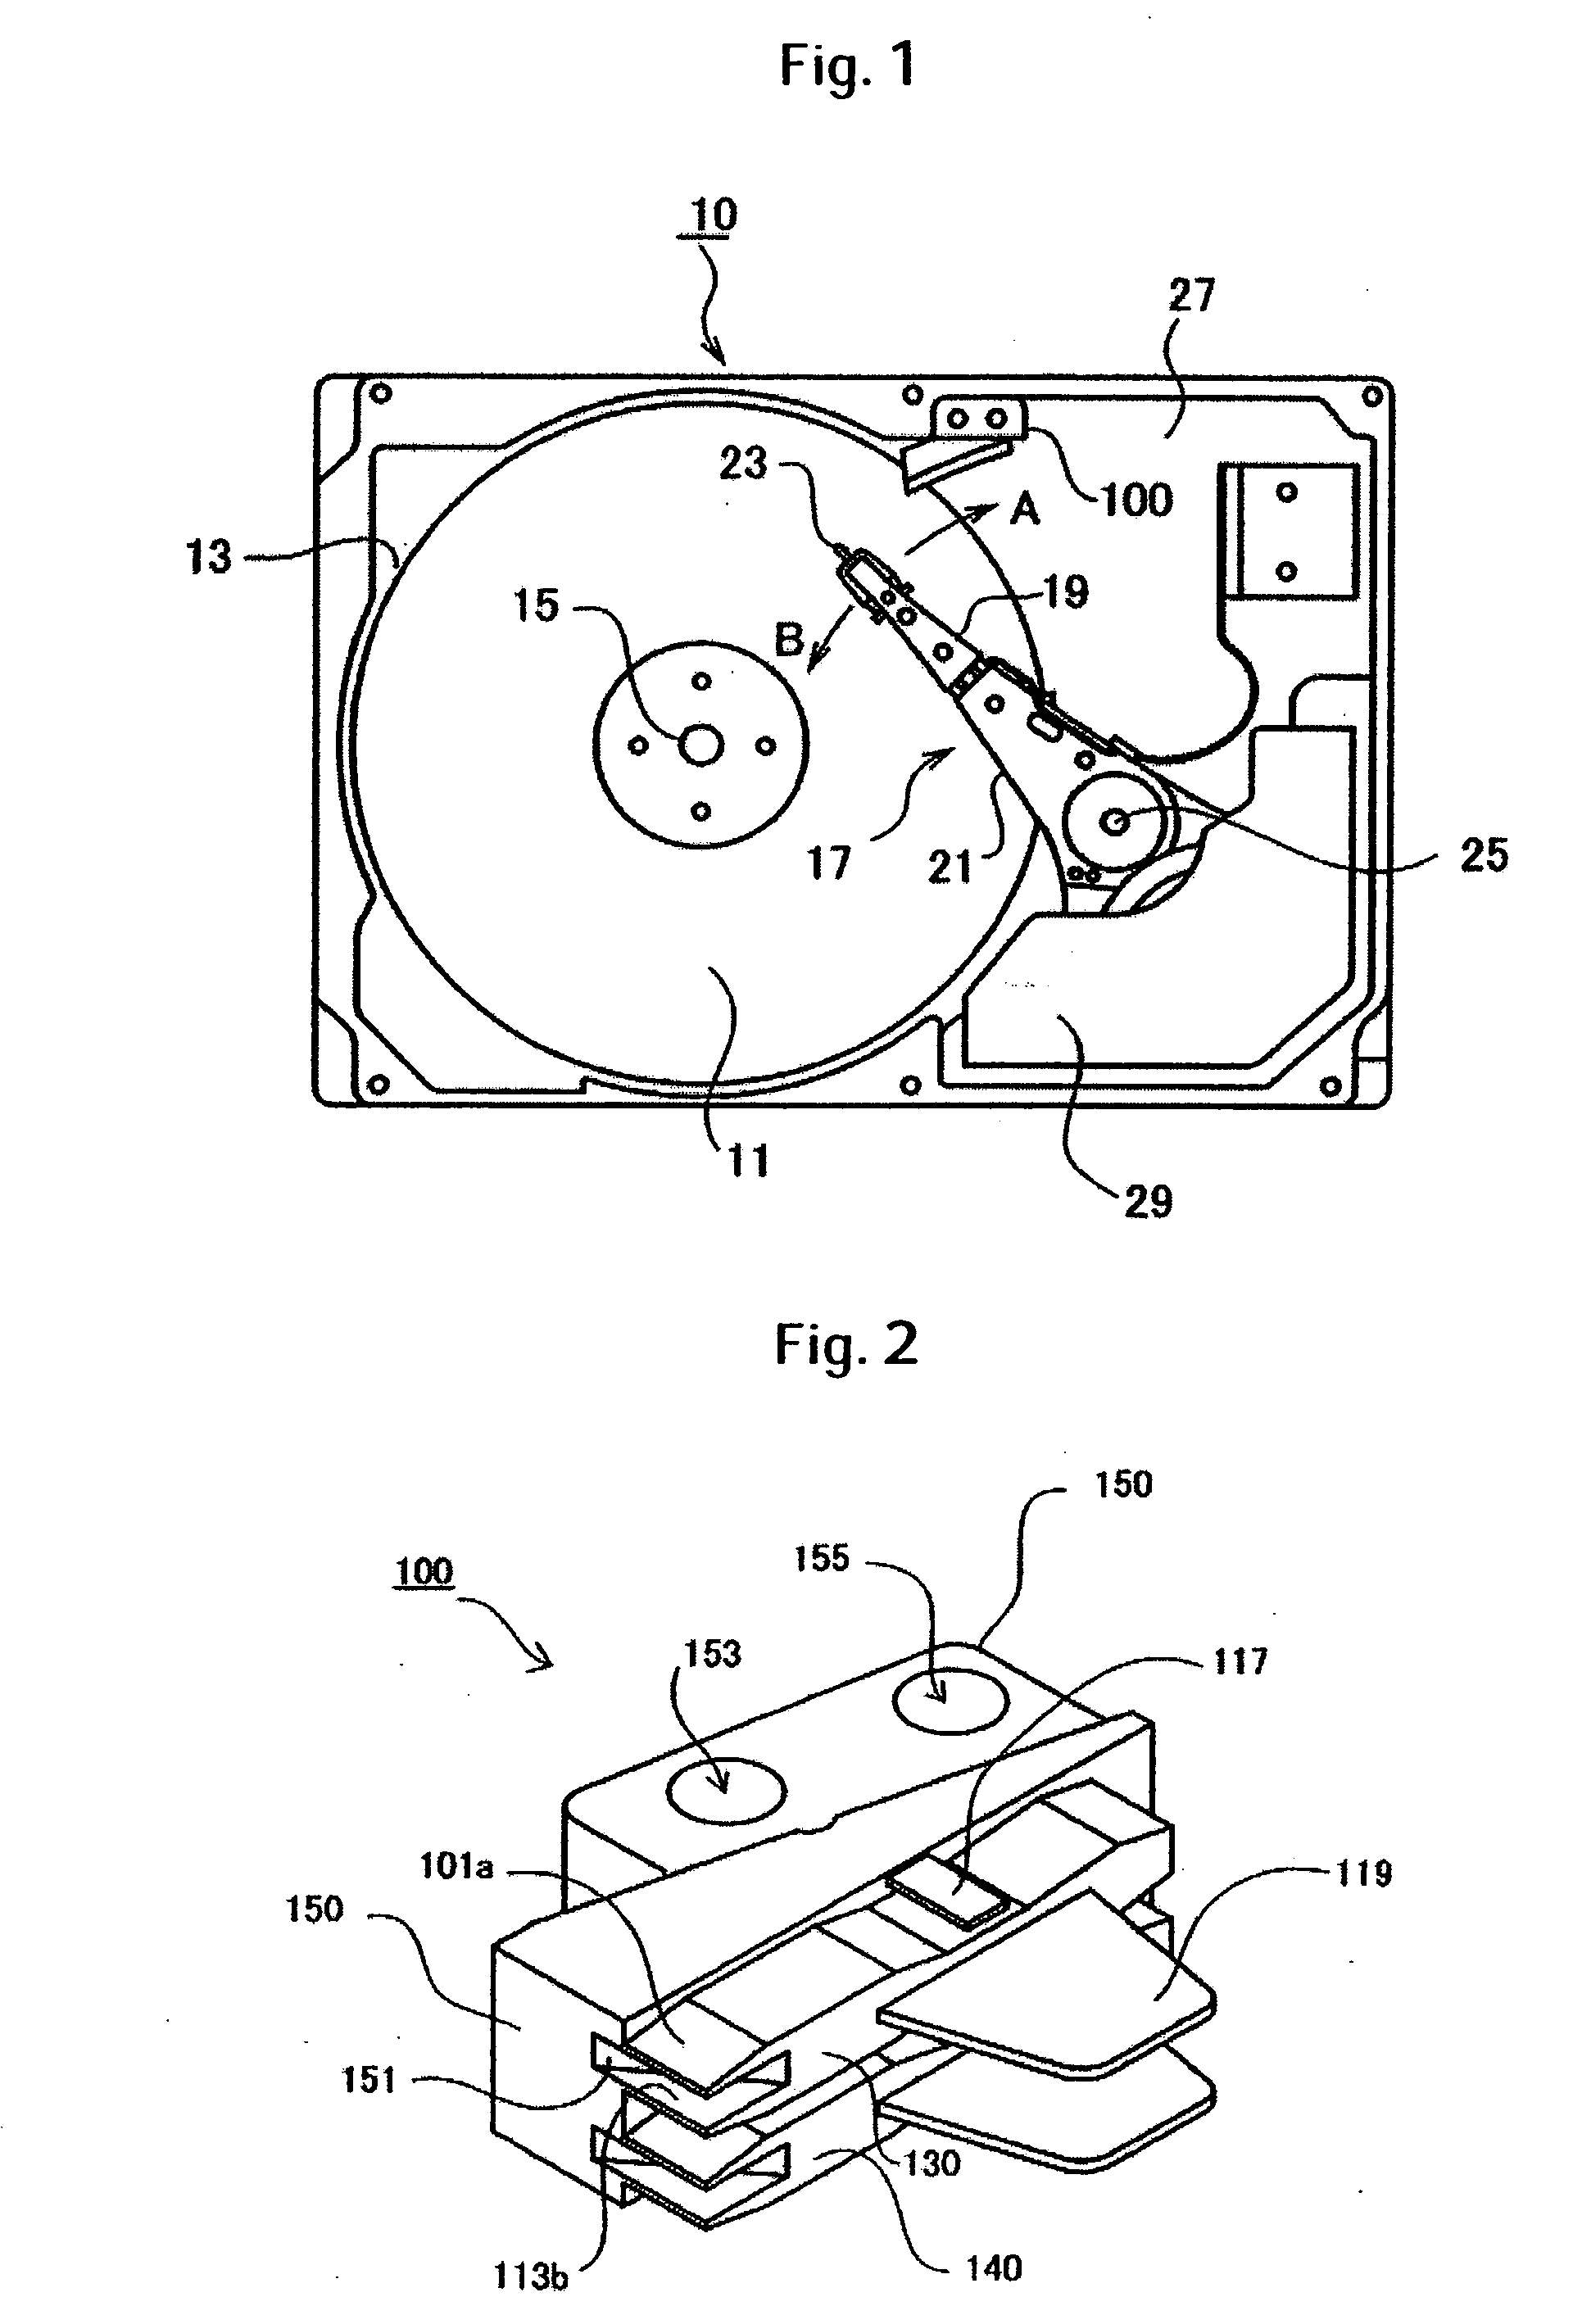 Shock improvement ramp for load/unload mechanism and magnetic disk drive